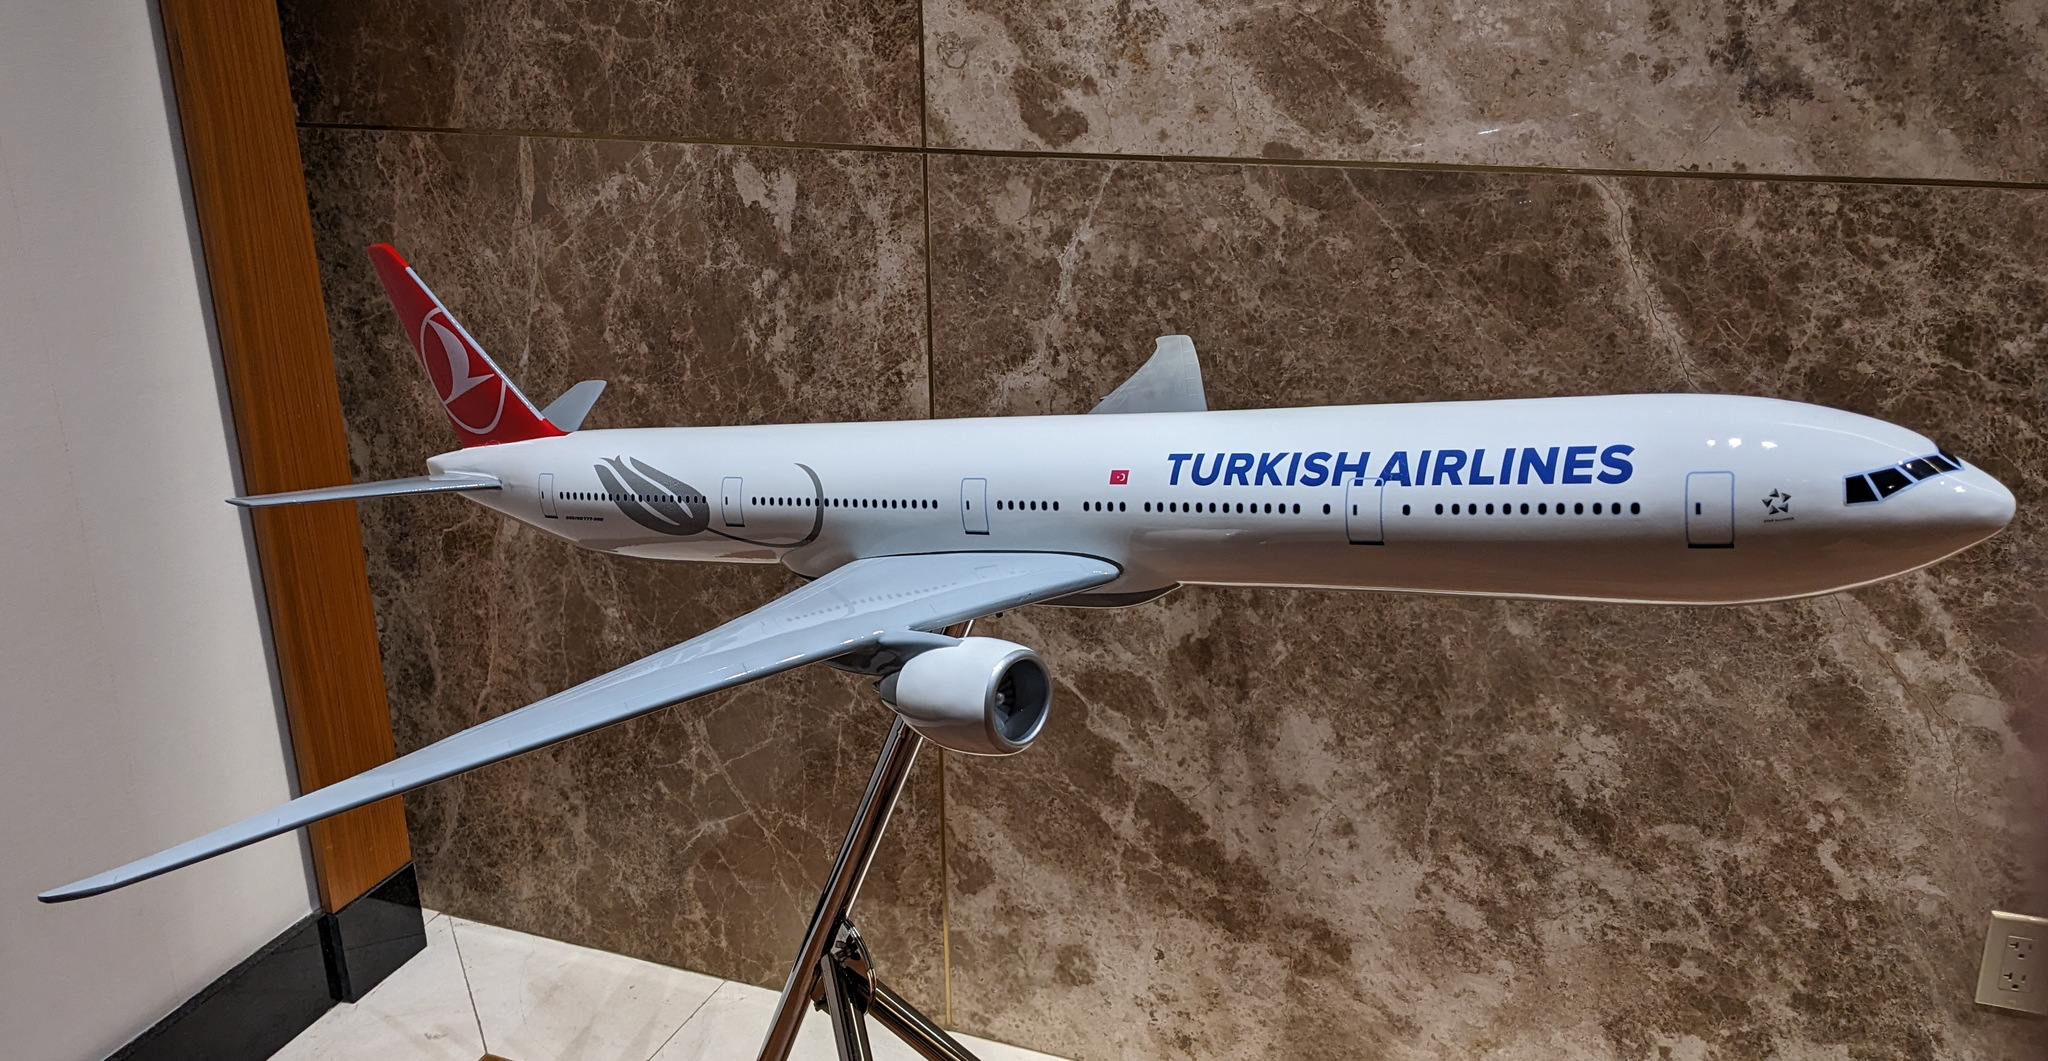 large Turkish Airlines (777) model plane in lobby of lounge.